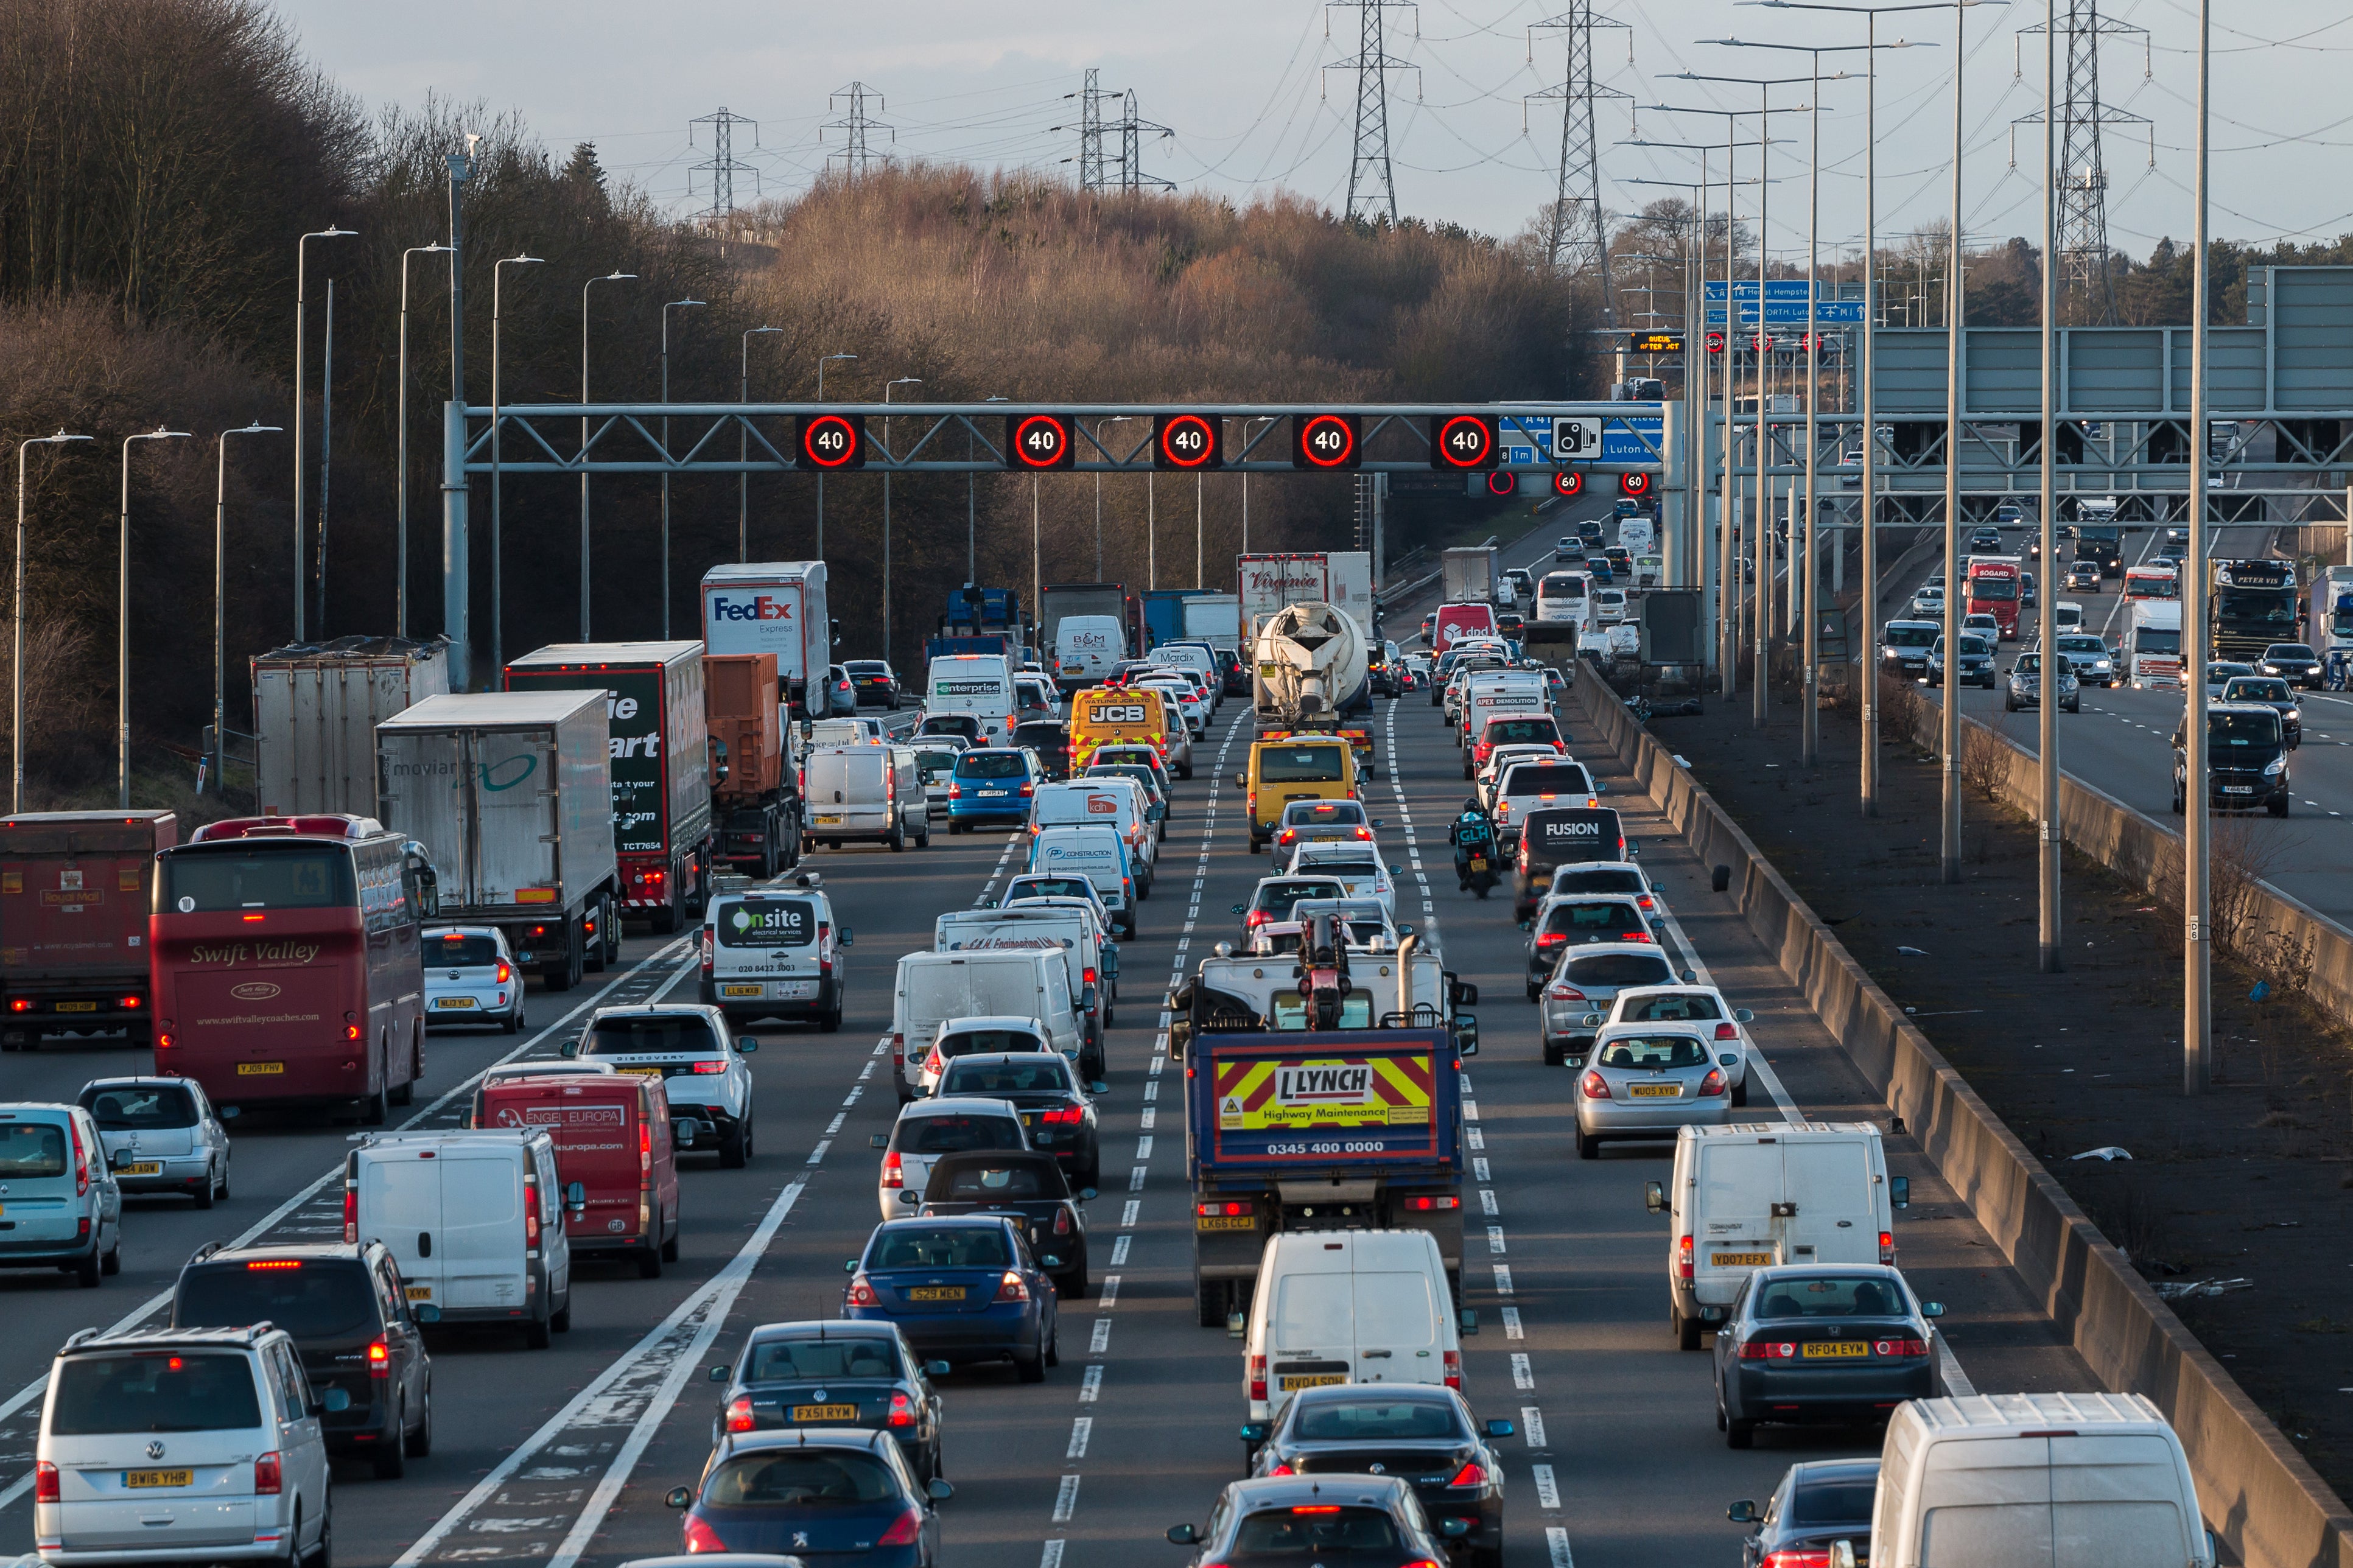 Air pollution from cars and the burning of fuels is a major contributor to premature death in the UK